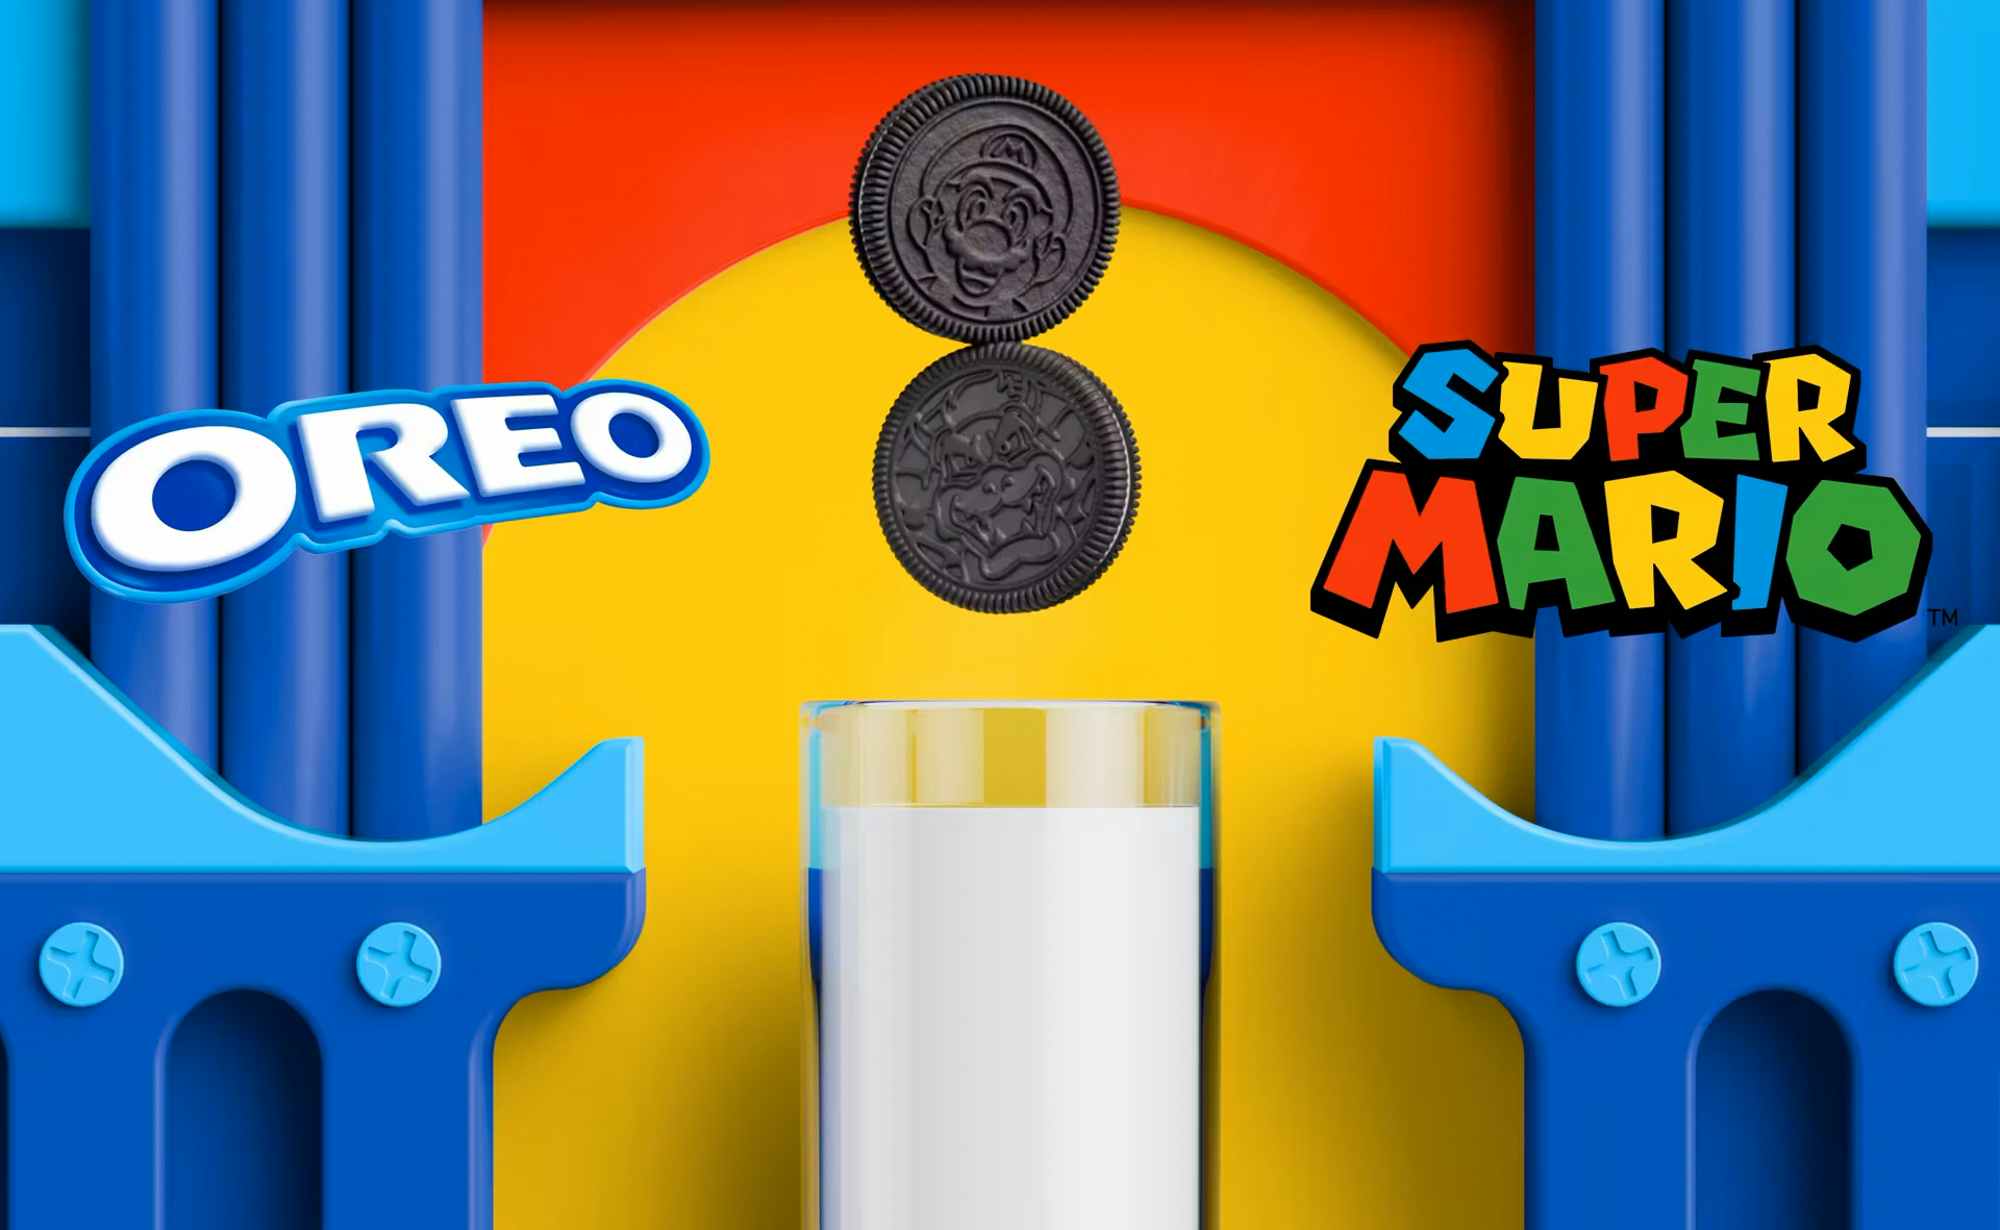 Super Mario Bros Oreo character cookies above a glass of milk with the Oreo and Super Mario logos